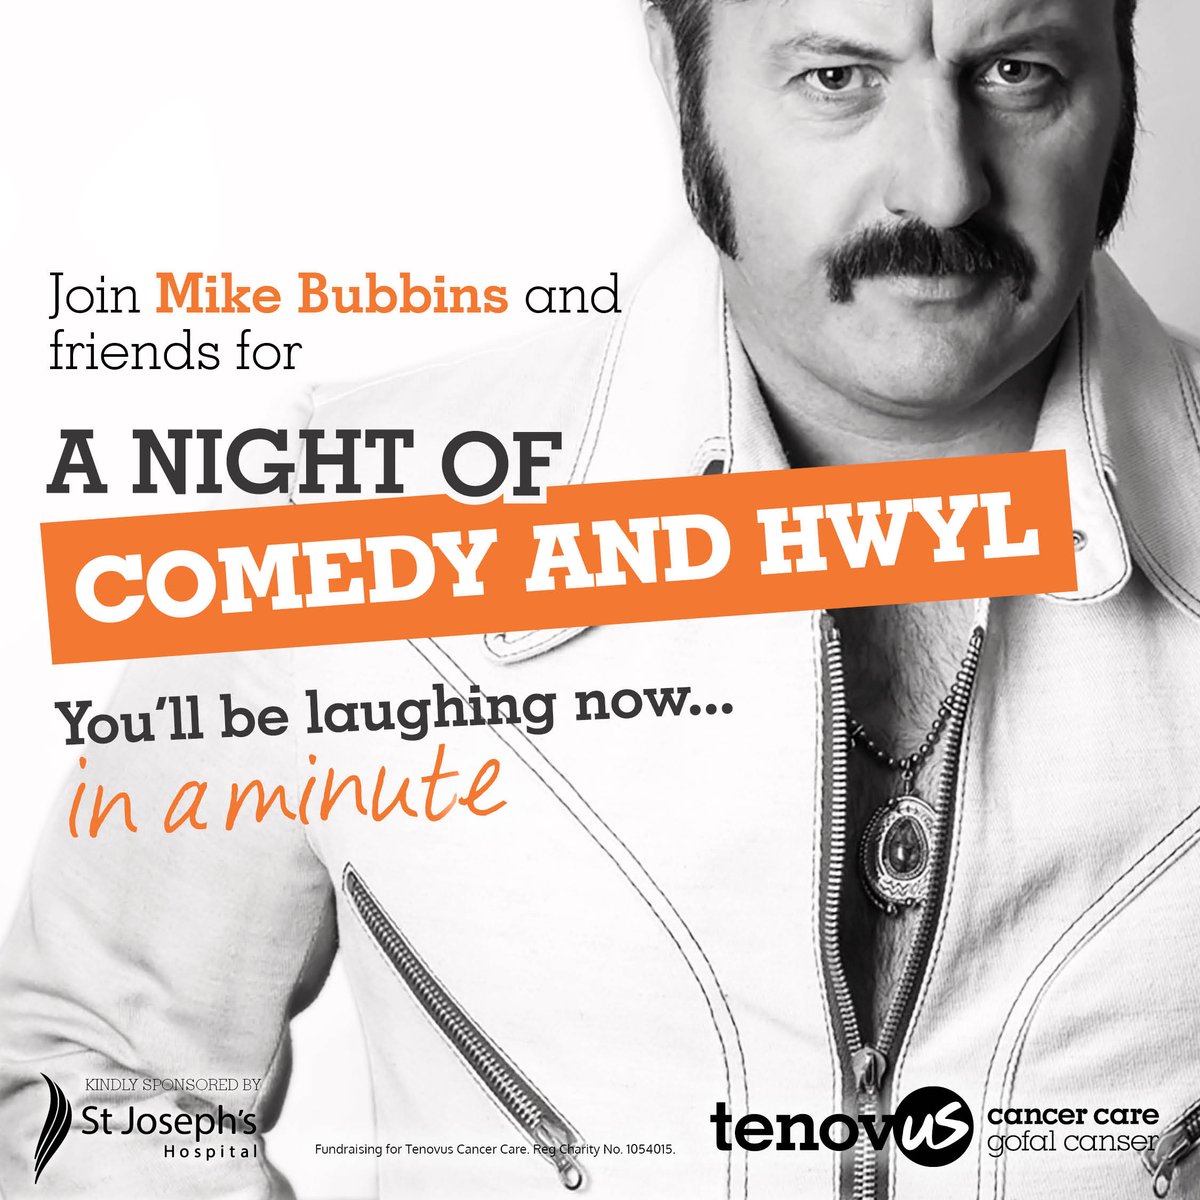 We’ve got lots of laughs in store for you tomorrow night at our Night of Comedy and Hwyl @TheGleeClubCradiff featuring Welsh Comedians Mike Bubbins, Kiri Pritchard Mclean and Priya Hall To join us, click the link below to get your tickets! (tenovuscancercare.org.uk)